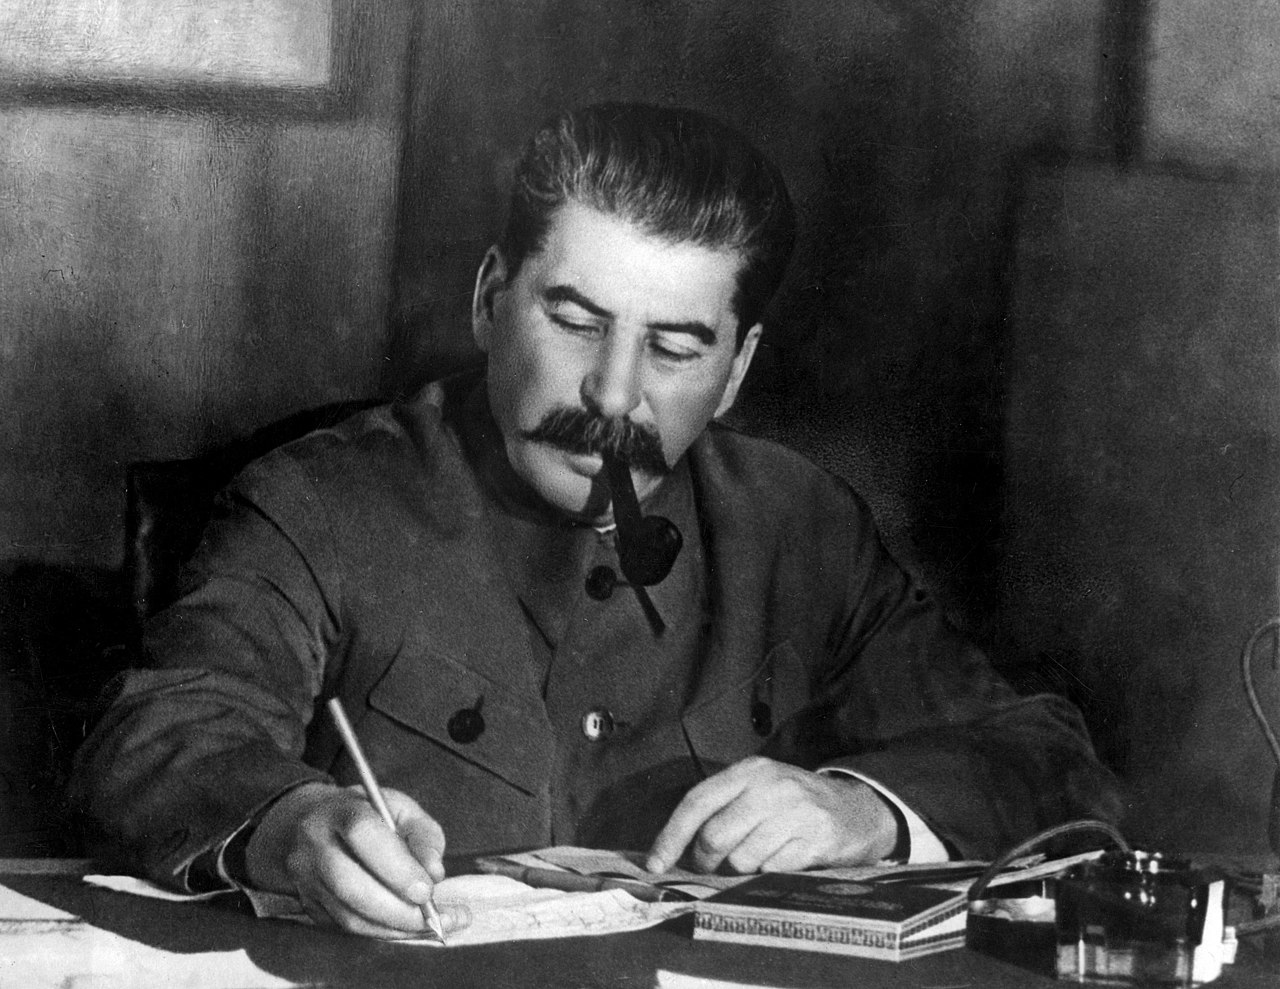 Stalin in March 1935